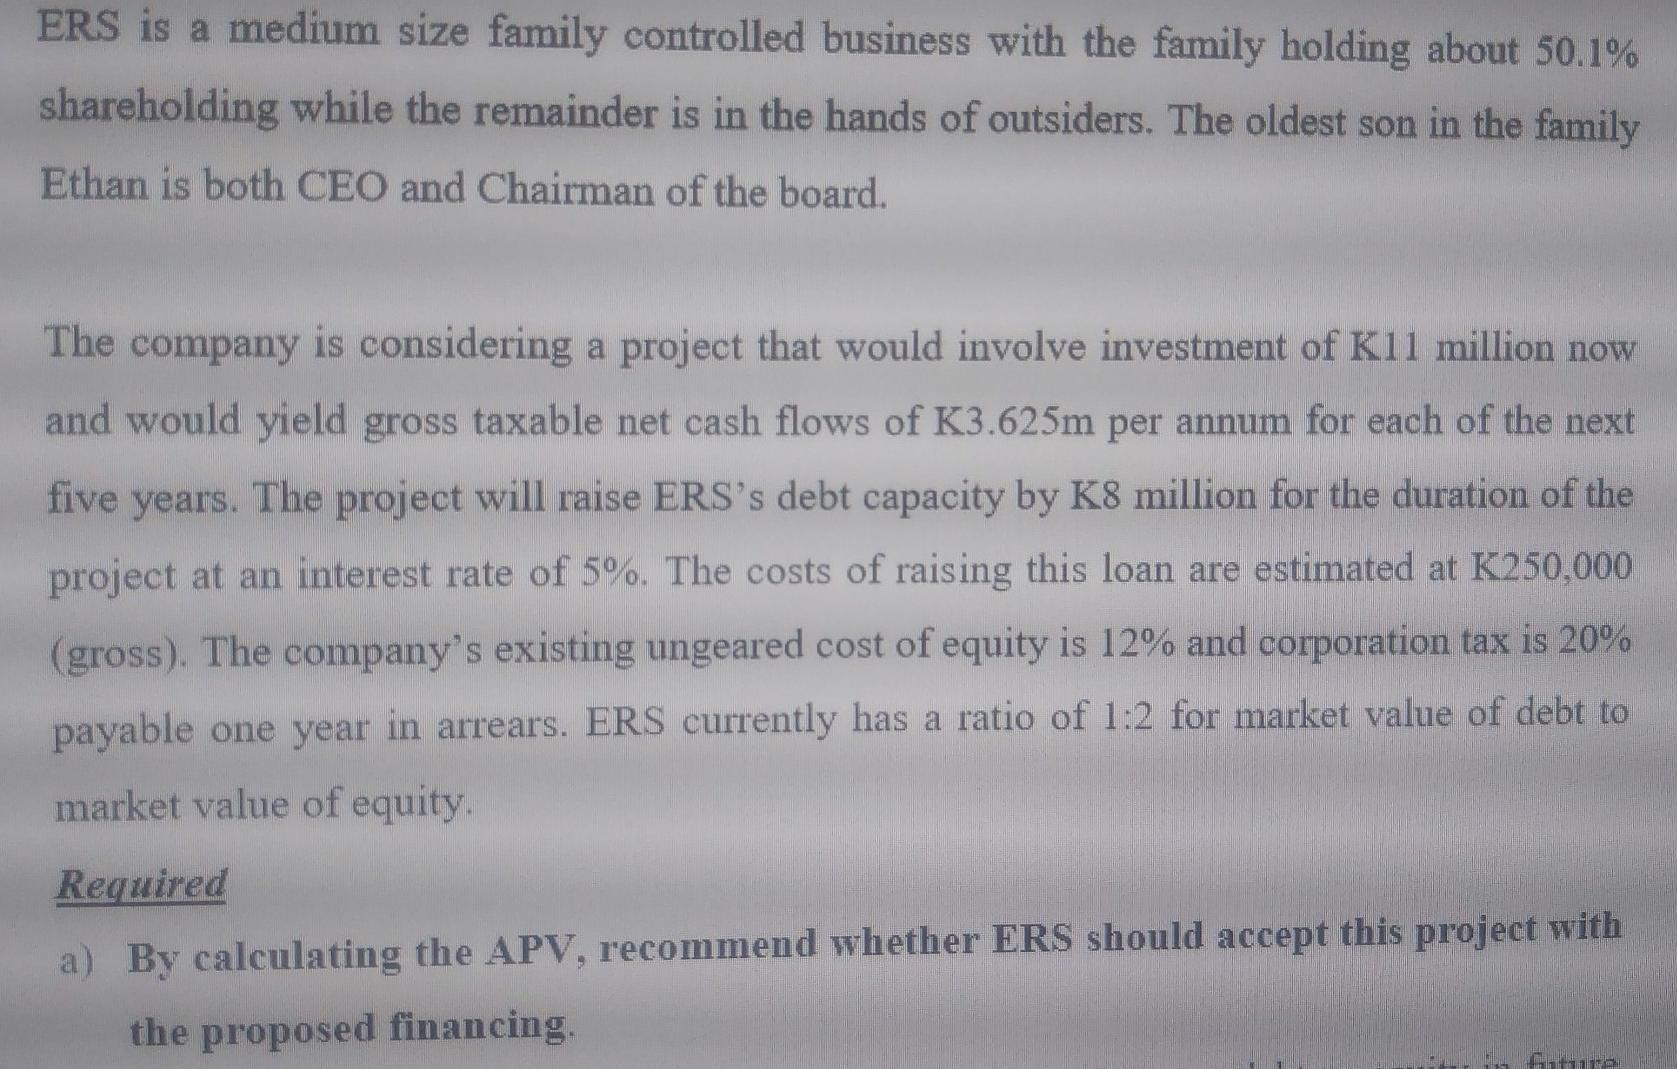 ERS is a medium size family controlled business with the family holding about 50.1% shareholding while the remainder is in th